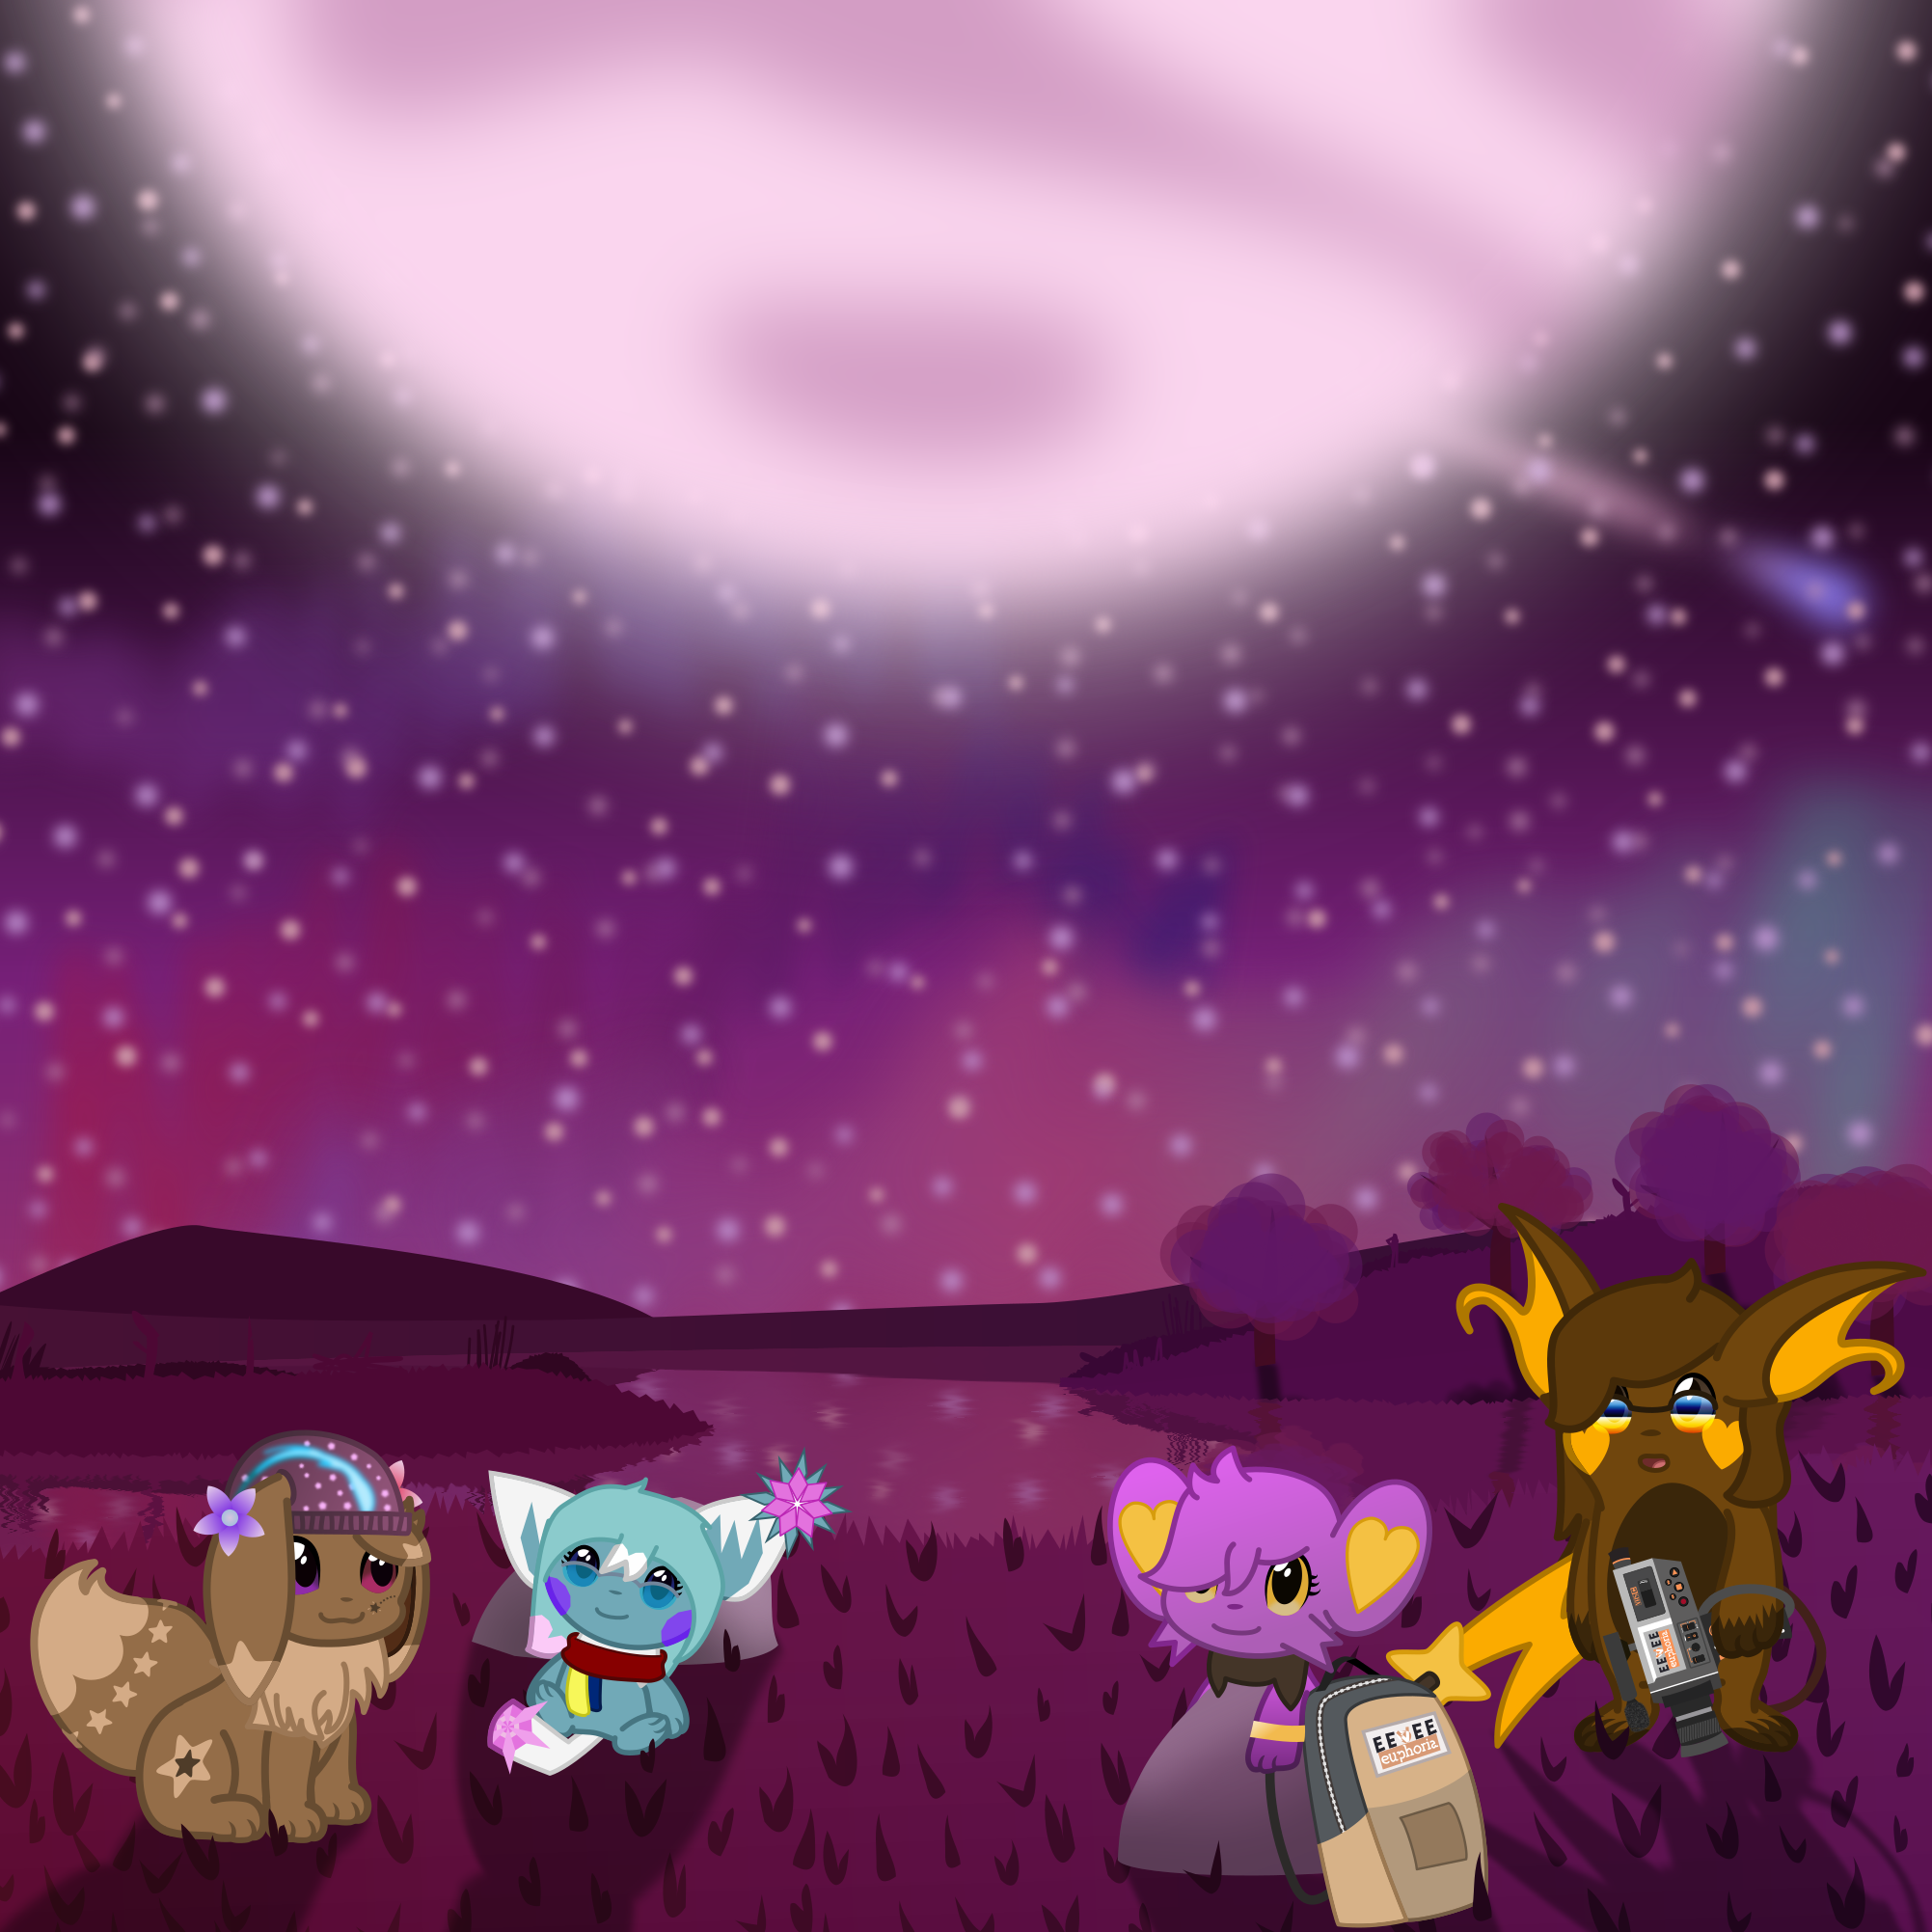 An eevee, pichu, shinx, and raichu all look up at the moon, all standing on a purpleish hill.